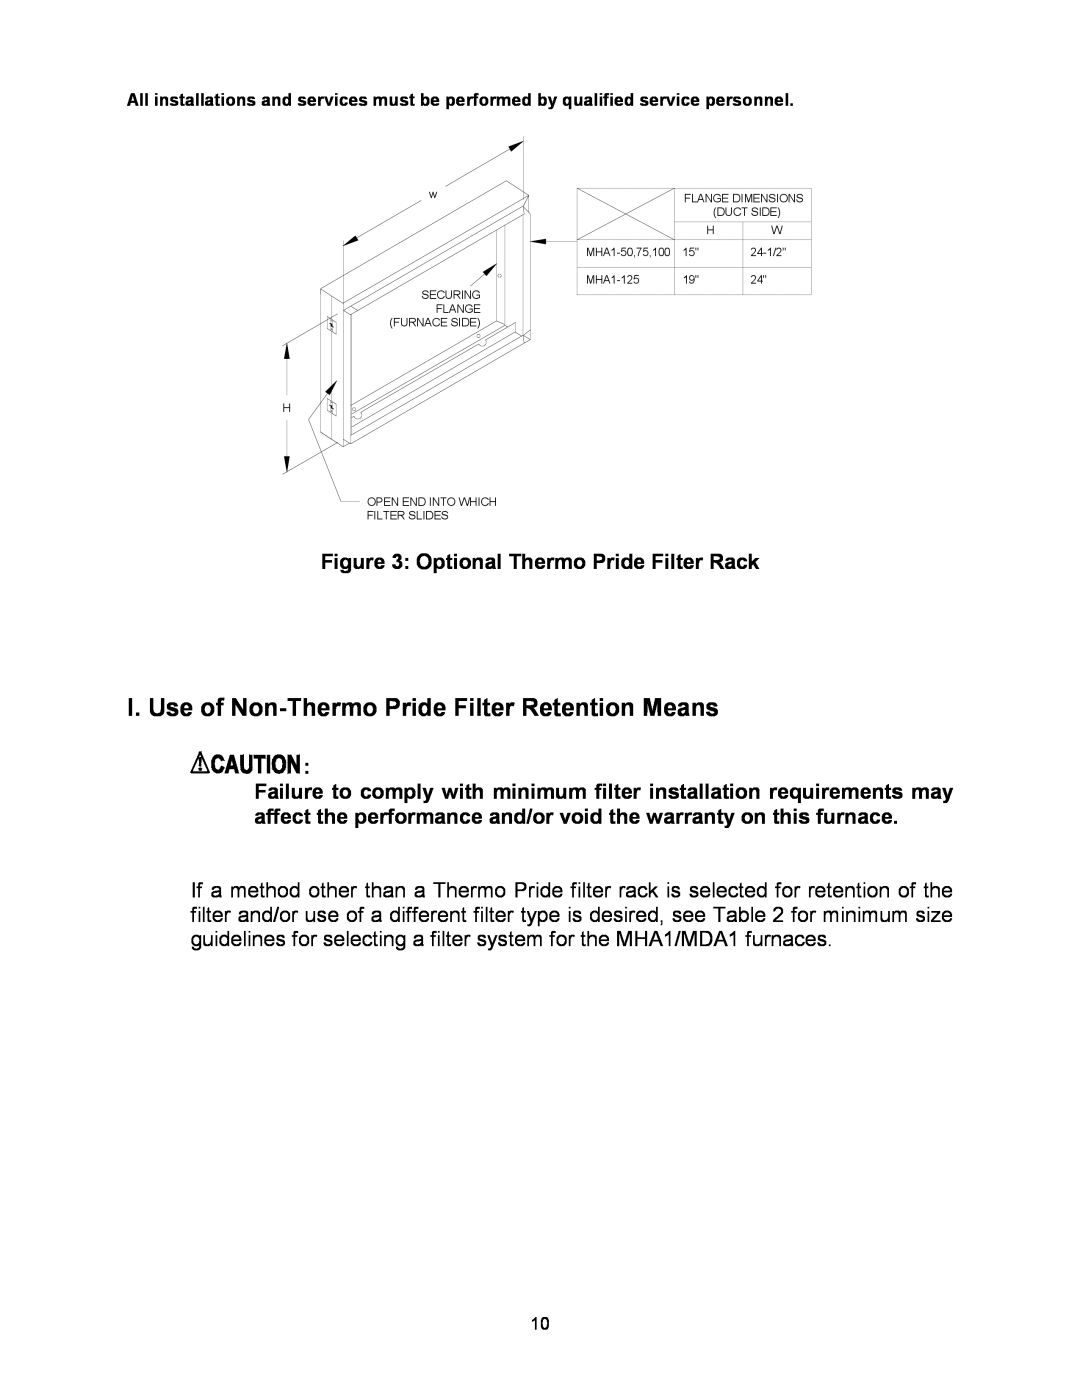 Thermo Products MDA1-75N, MDA1-50N I. Use of Non-ThermoPride Filter Retention Means, Optional Thermo Pride Filter Rack 